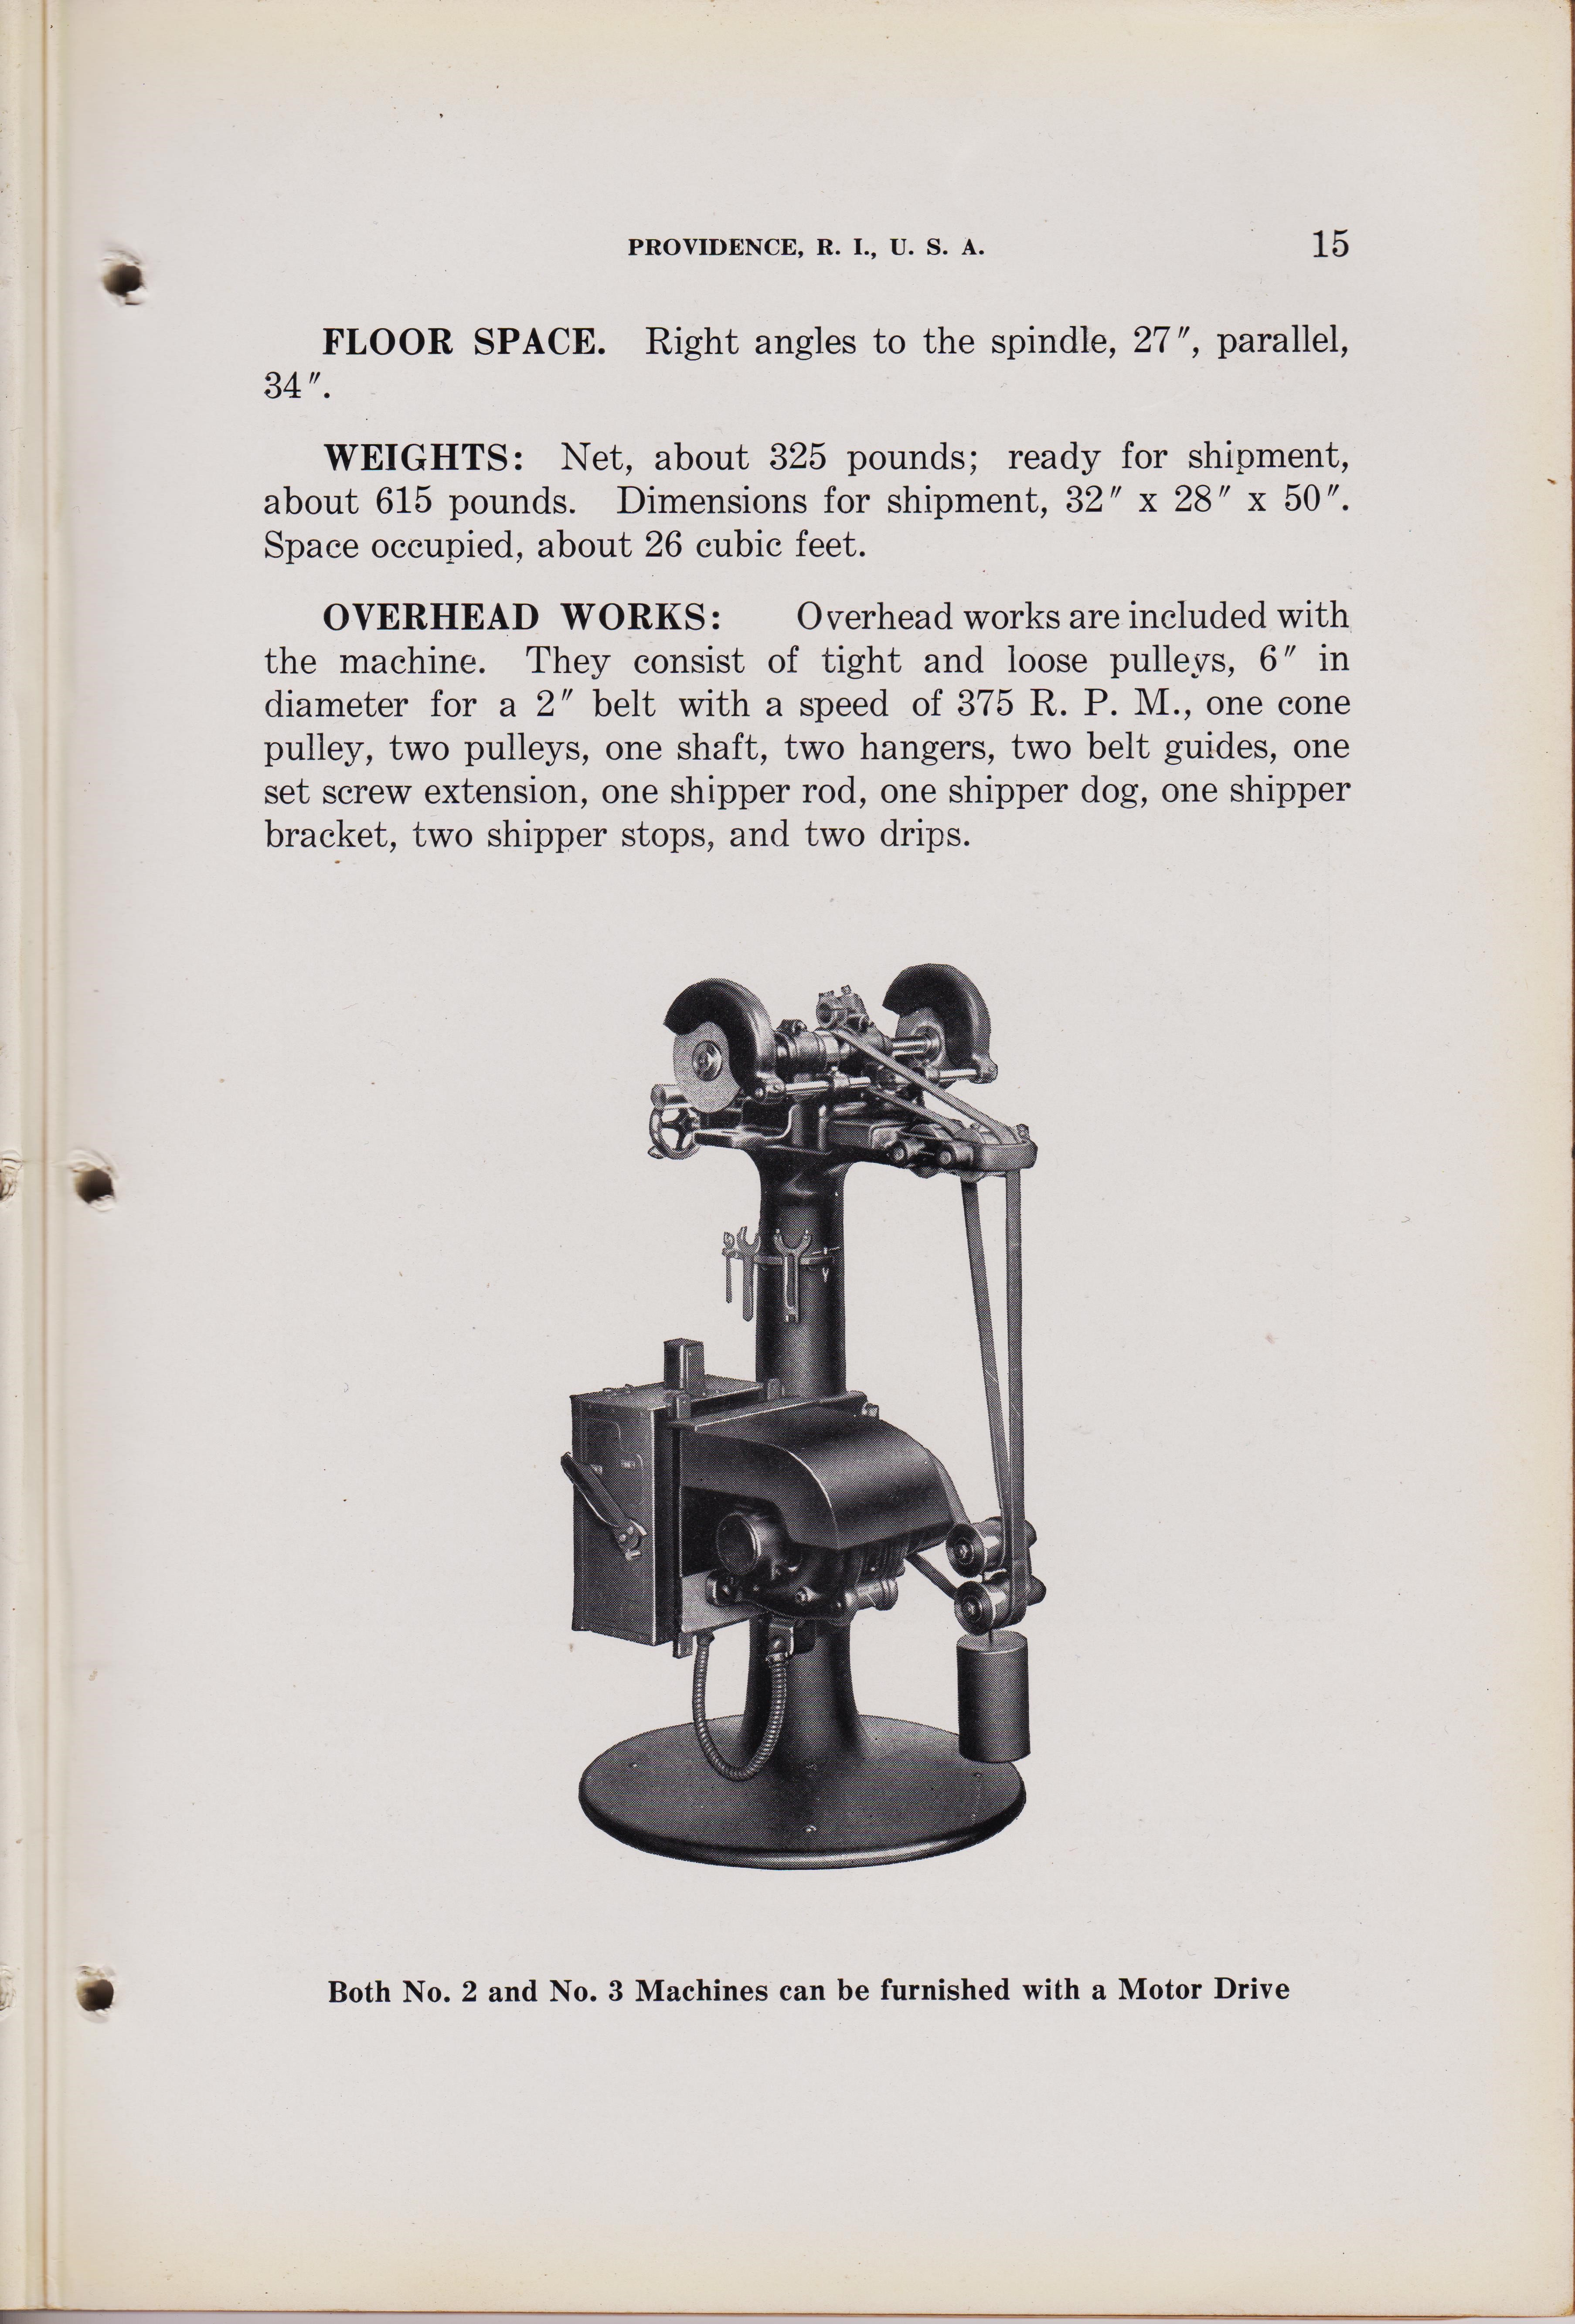 https://antiquemachinery.com/images-2020/Universal-Cutter-and-Reamer-Grinder-Machine-Brown-and-Sharpe-Mfg-Co-1929-No2-No3-pg-15.jpeg